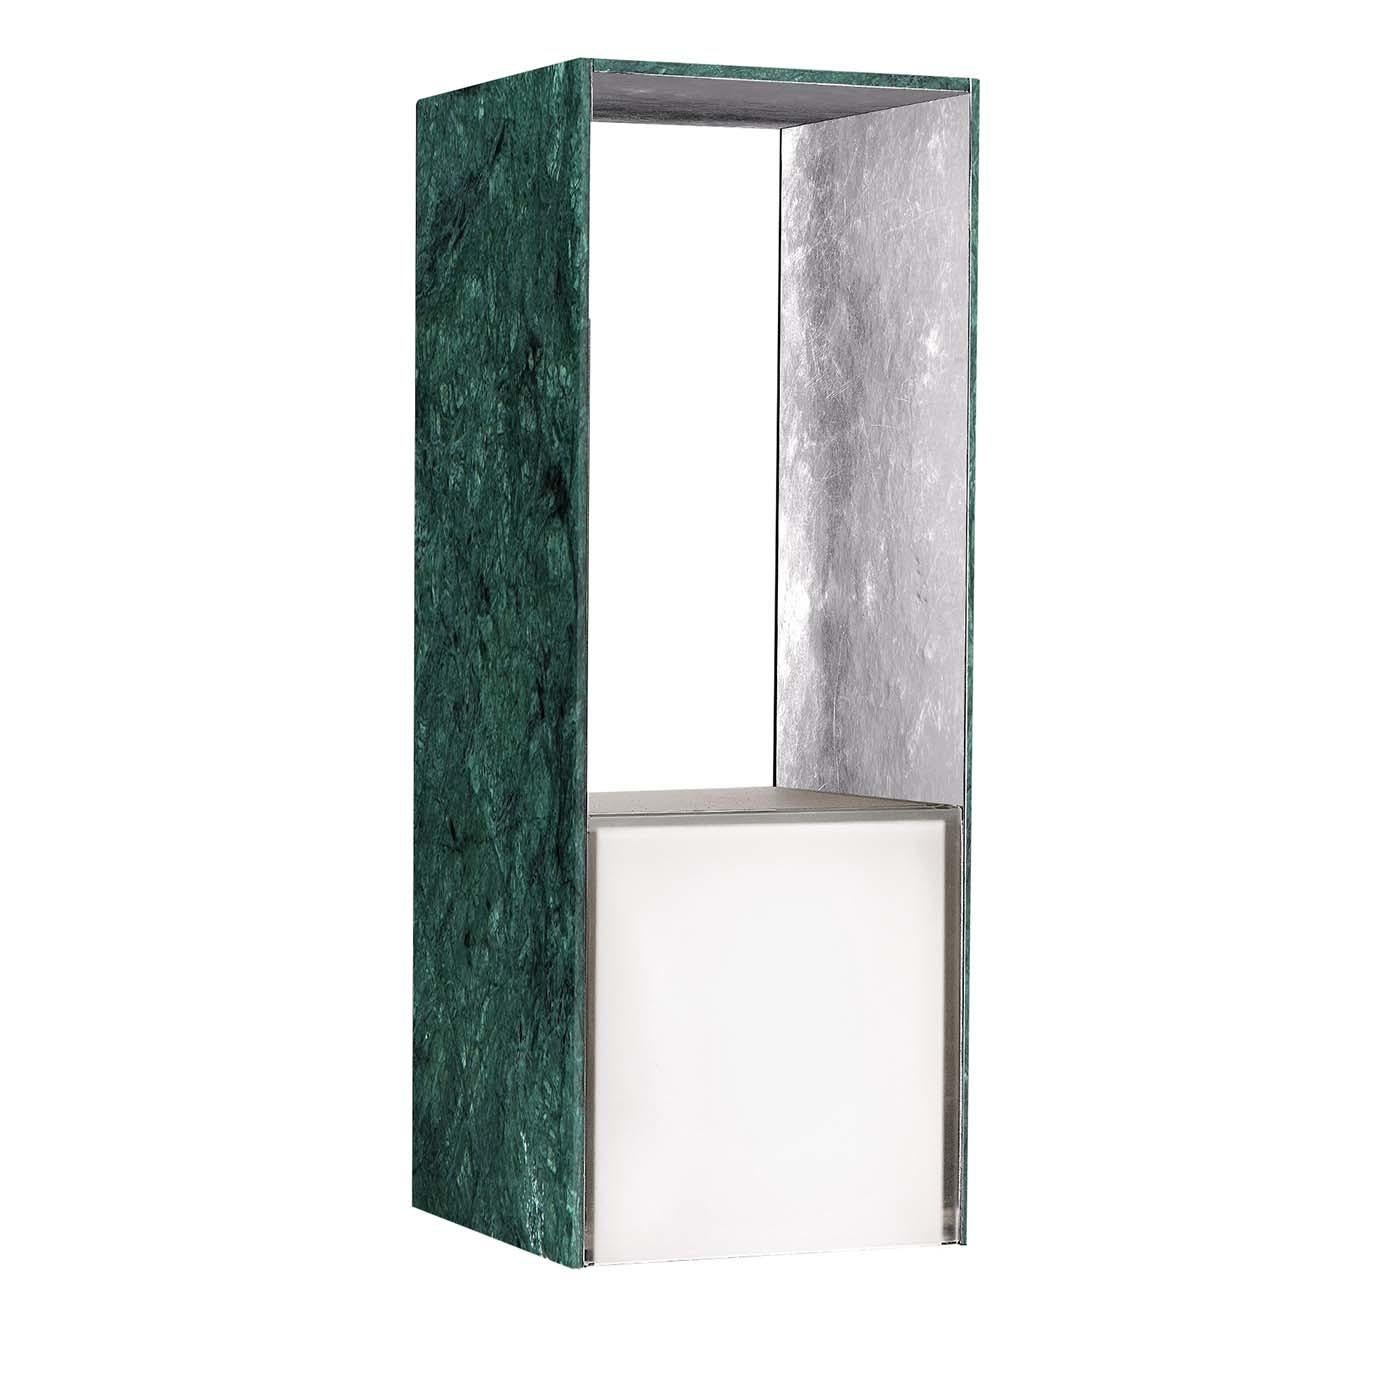 A deluxe LED lamp with indirect light and dimmable touch switch, the presence table lamp in Verde Guatemala and silver is made of hand-worked marble coupled with metal using the Petramet technique and finished with gold or silver leaf. The central